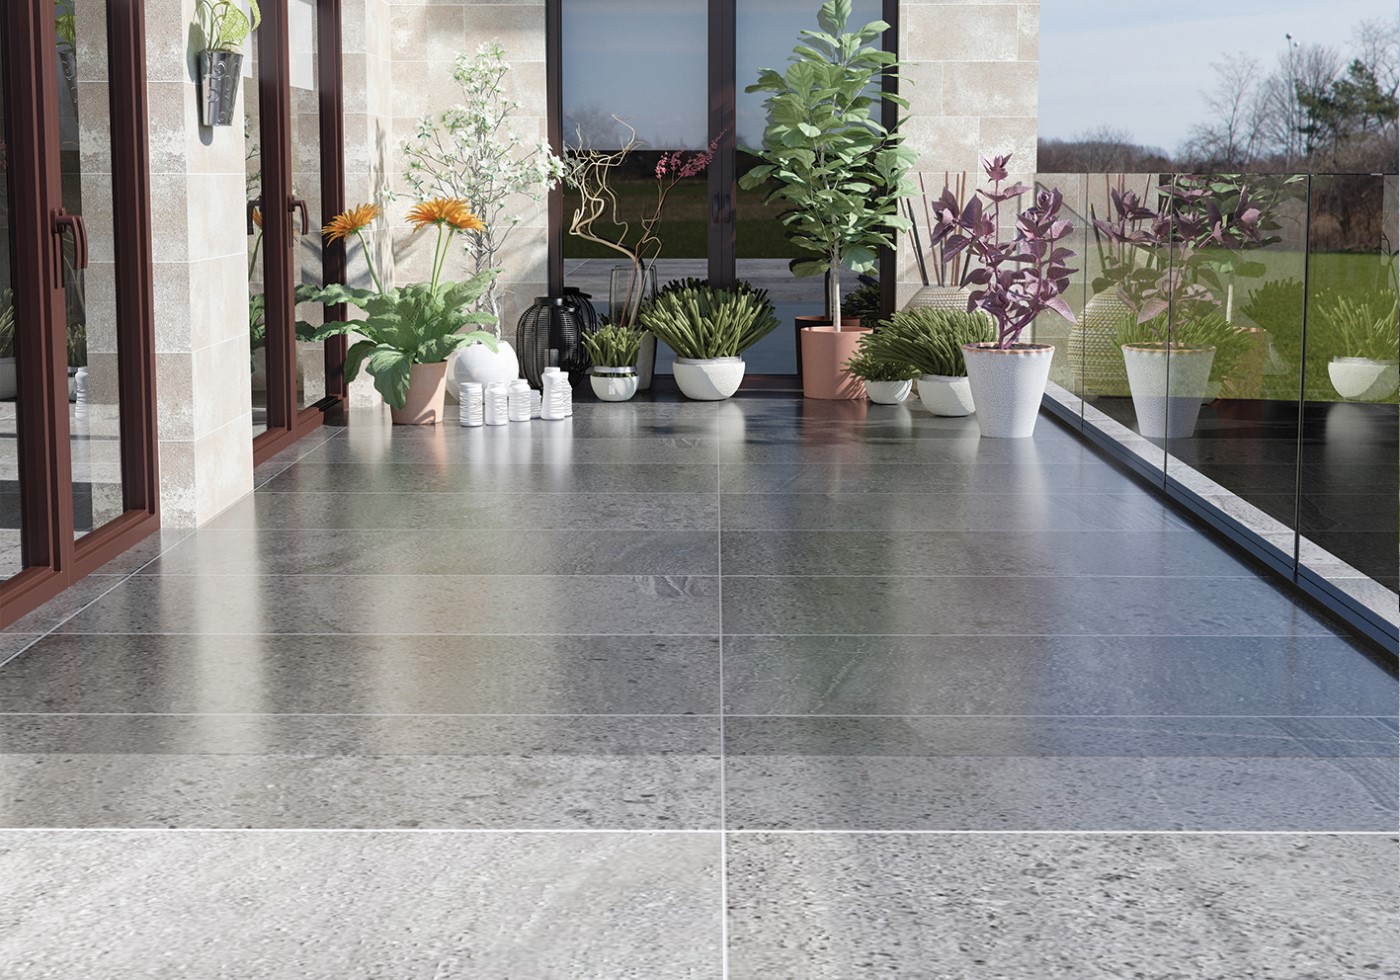 Transparent Waterproofing Solutions for Application on Existing Tiles